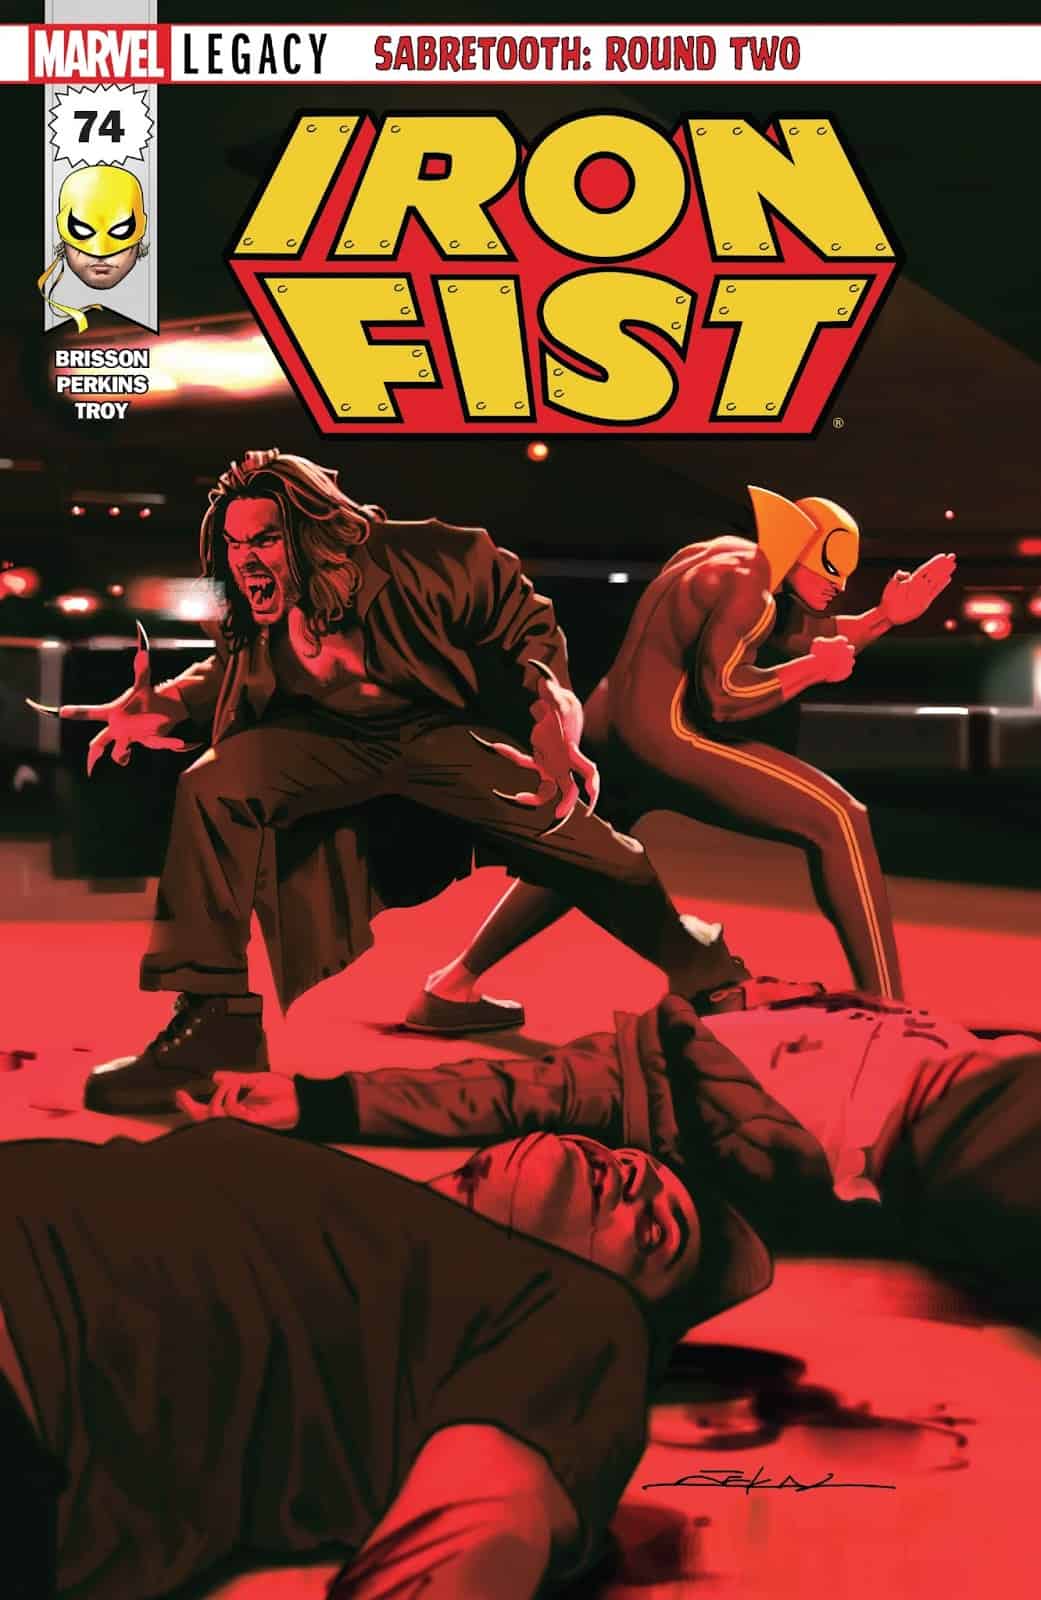 Marvel's Iron Fist Review: 3 Ups And 7 Downs